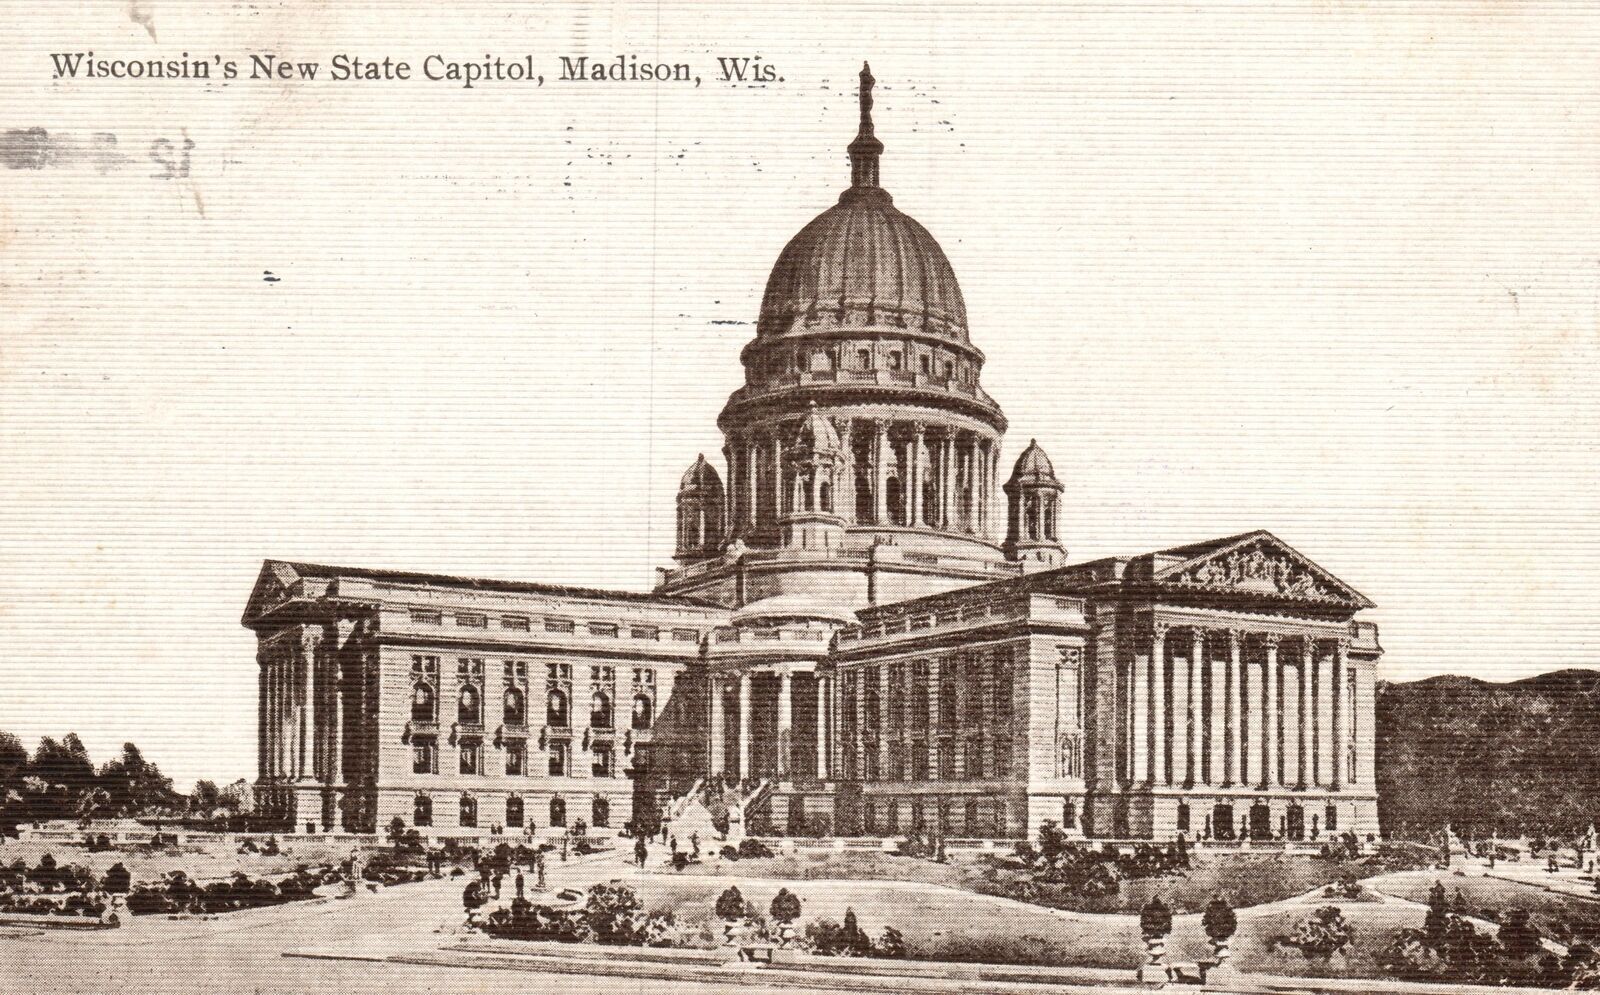 Vintage Postcard 1910's Wisconsin's New State Capitol Building Madison Wisconsin